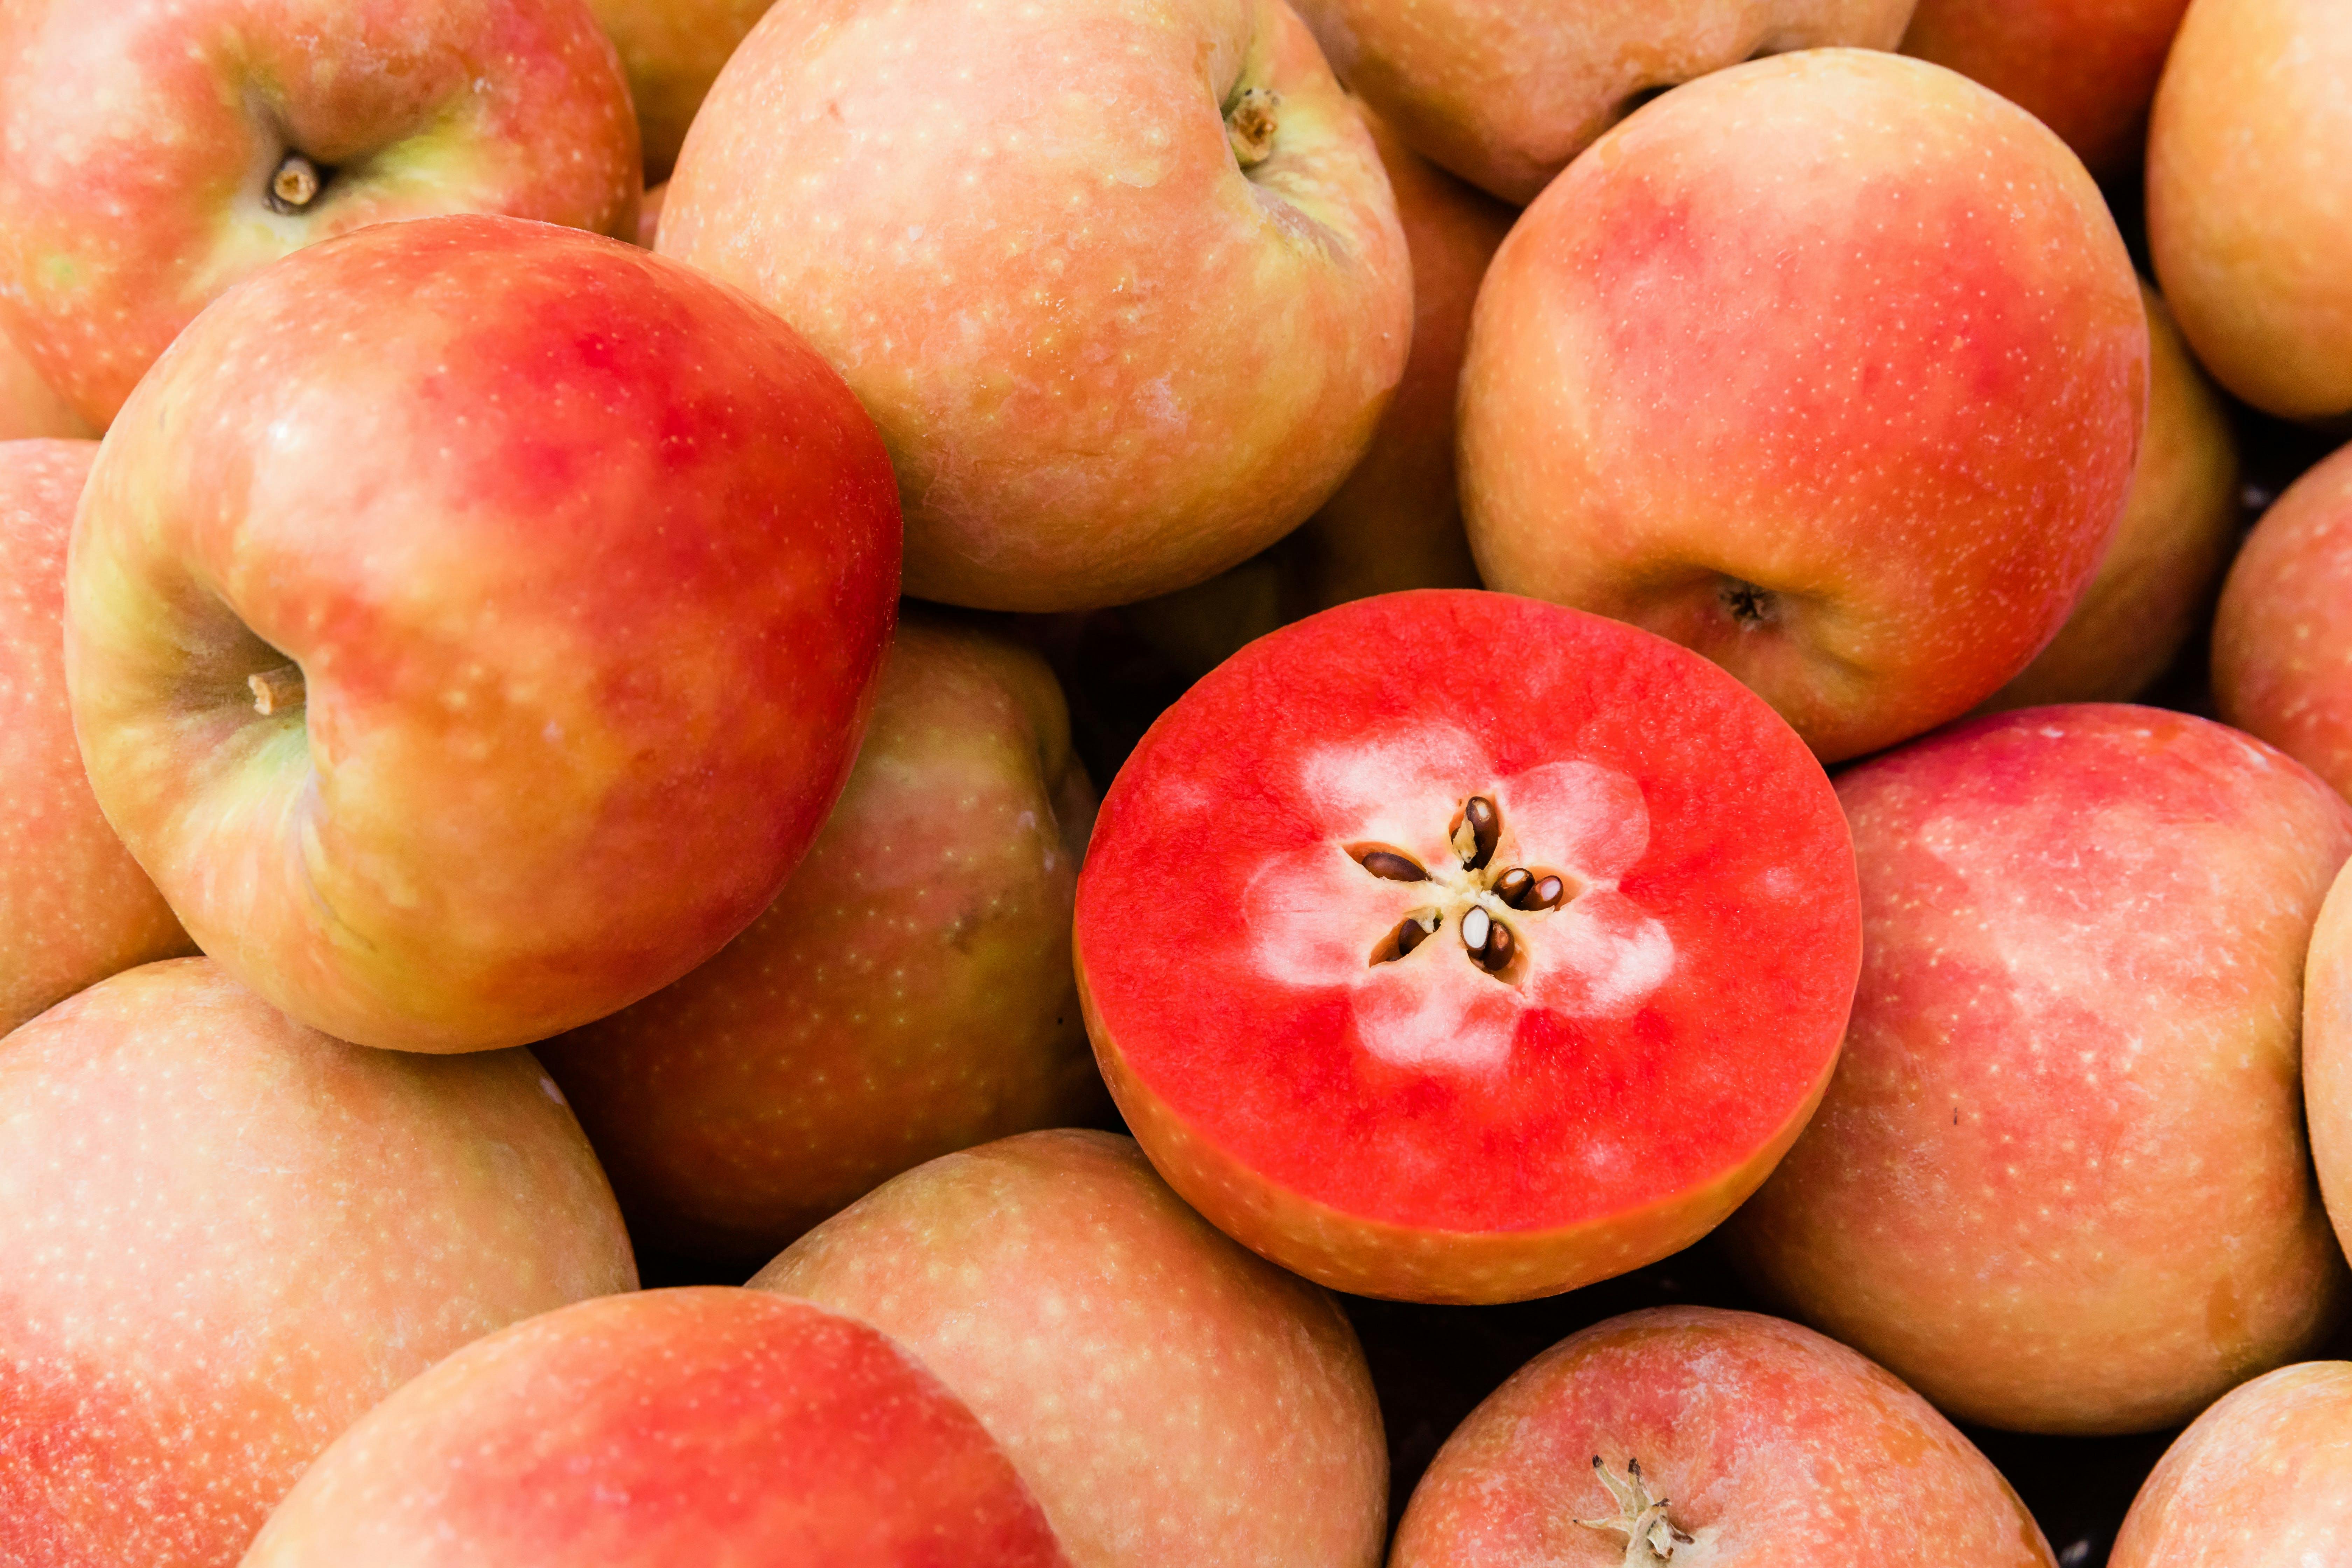 The Lucy Apple: A New Red-Fleshed Variety That Tastes Like Honeycrisp With  A Hint Of Berries